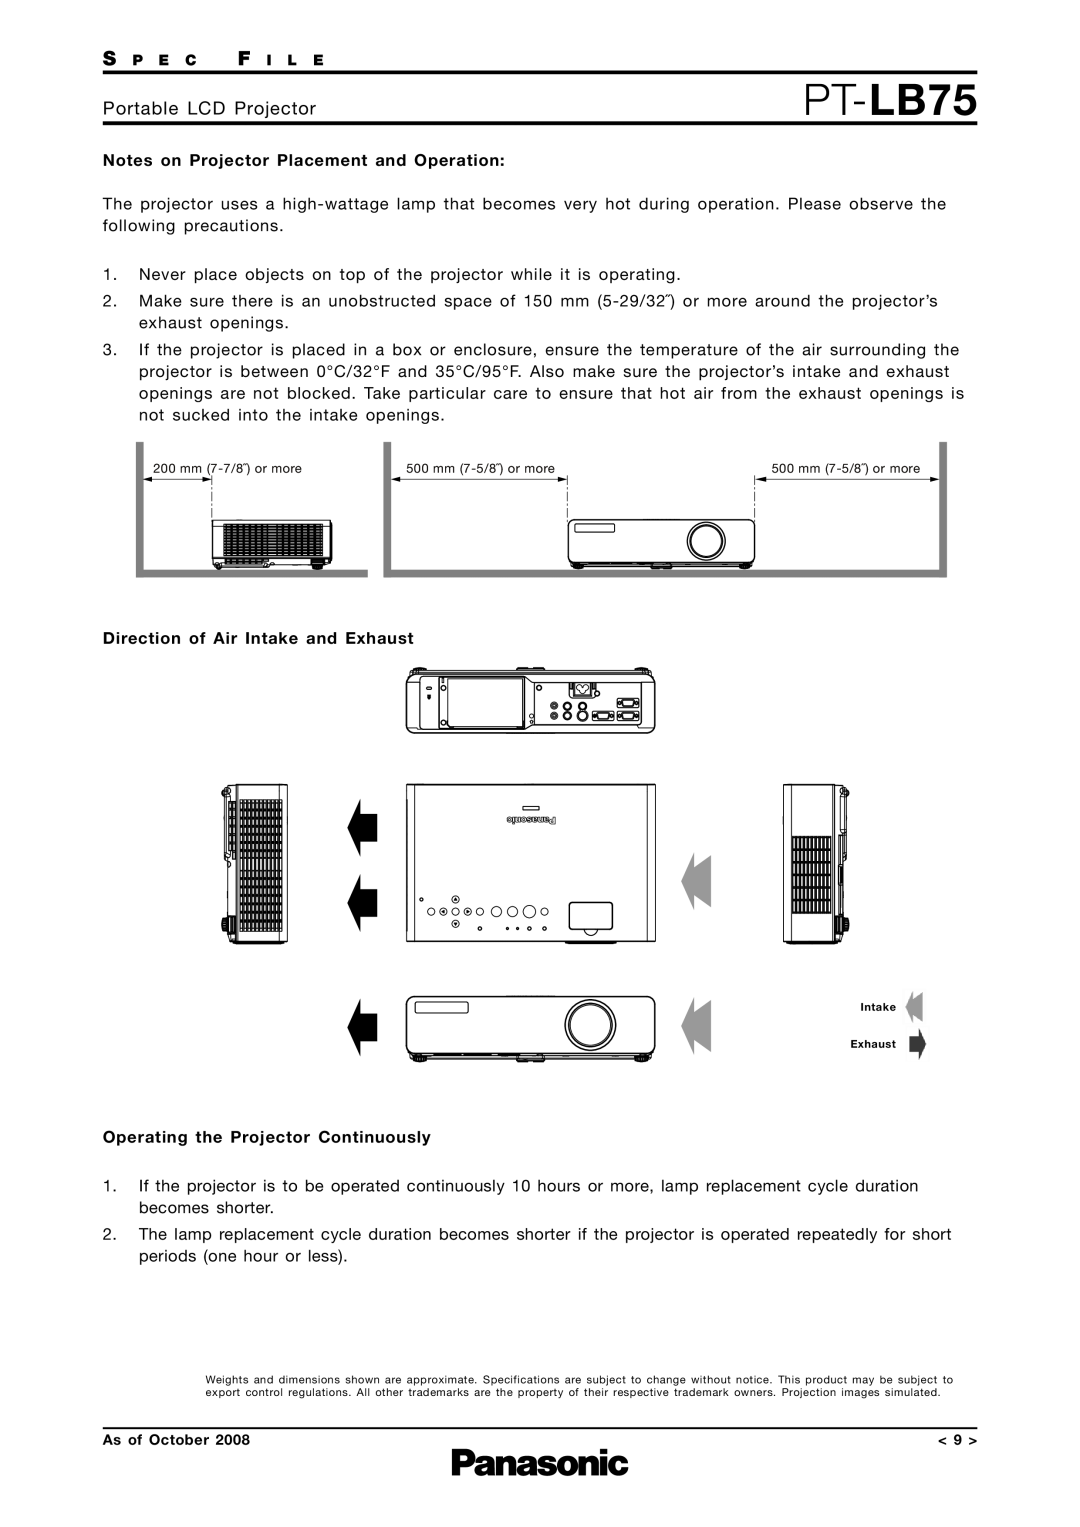 Panasonic PT-LB75 Notes on Projector Placement and Operation, Direction of Air Intake and Exhaust, Portable LCD Projector 